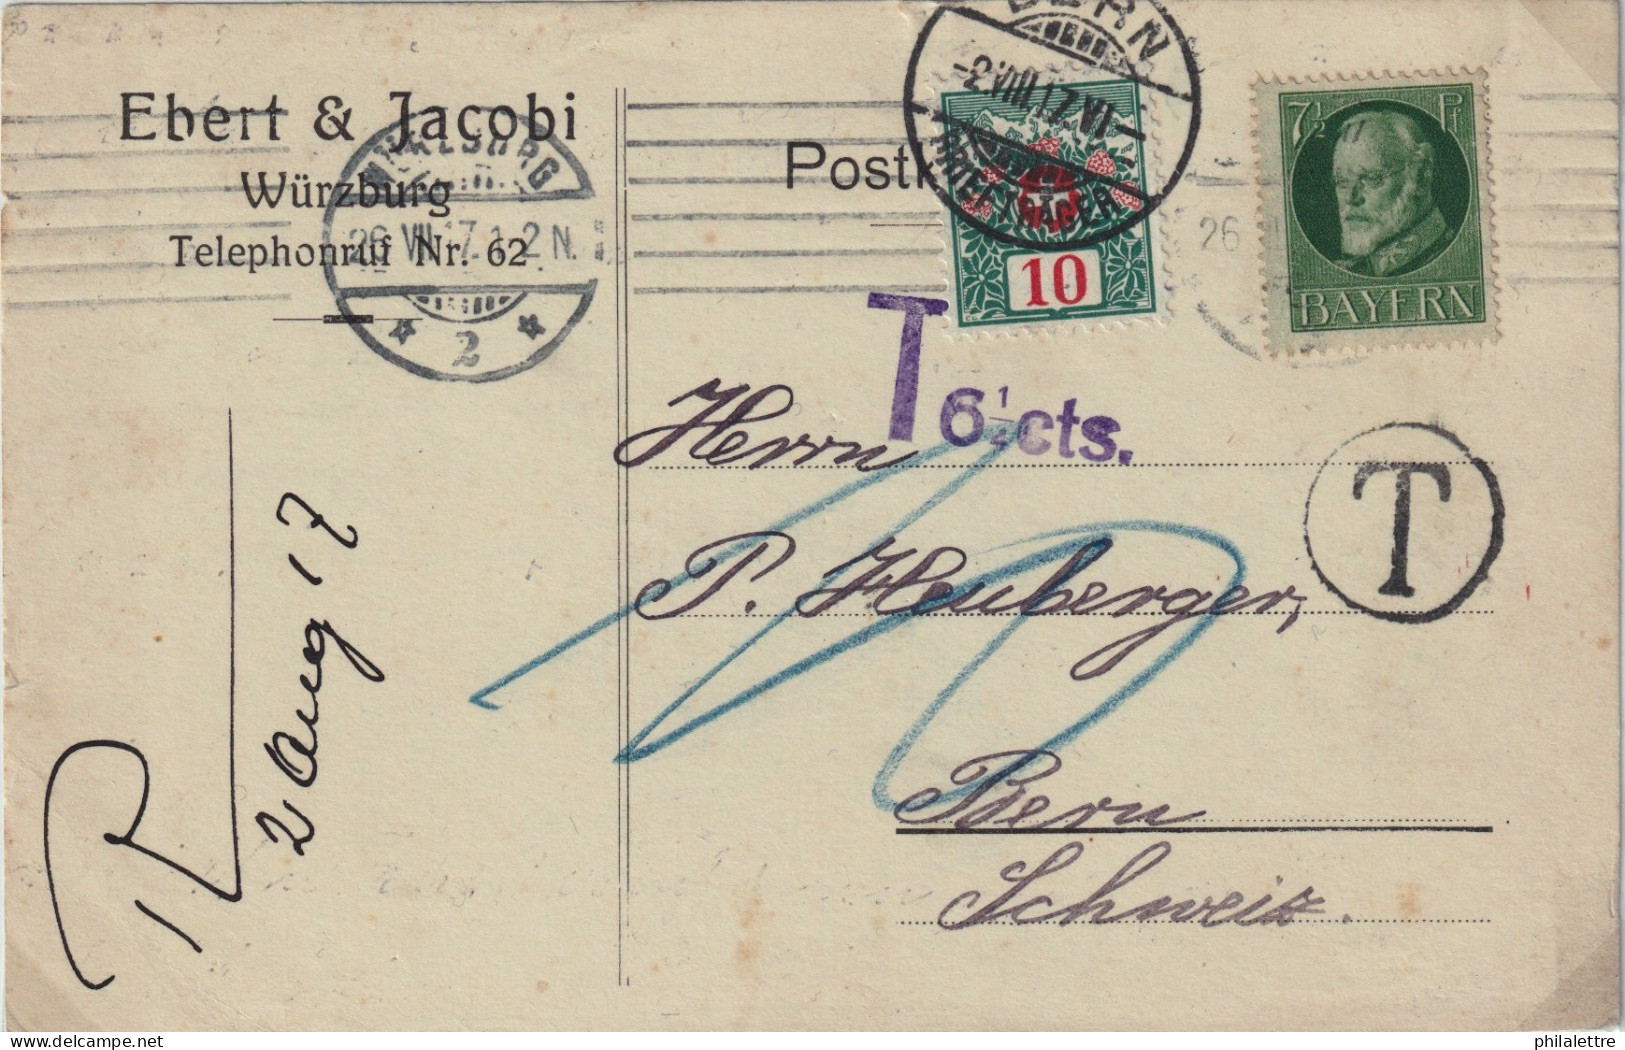 SUISSE / SWITZERLAND 1928 P. Due Mi.32 On PPC From BAVARIA Franked 7-1/2pf With "T 6-1/4cts" Postage Due Mark - Strafportzegels